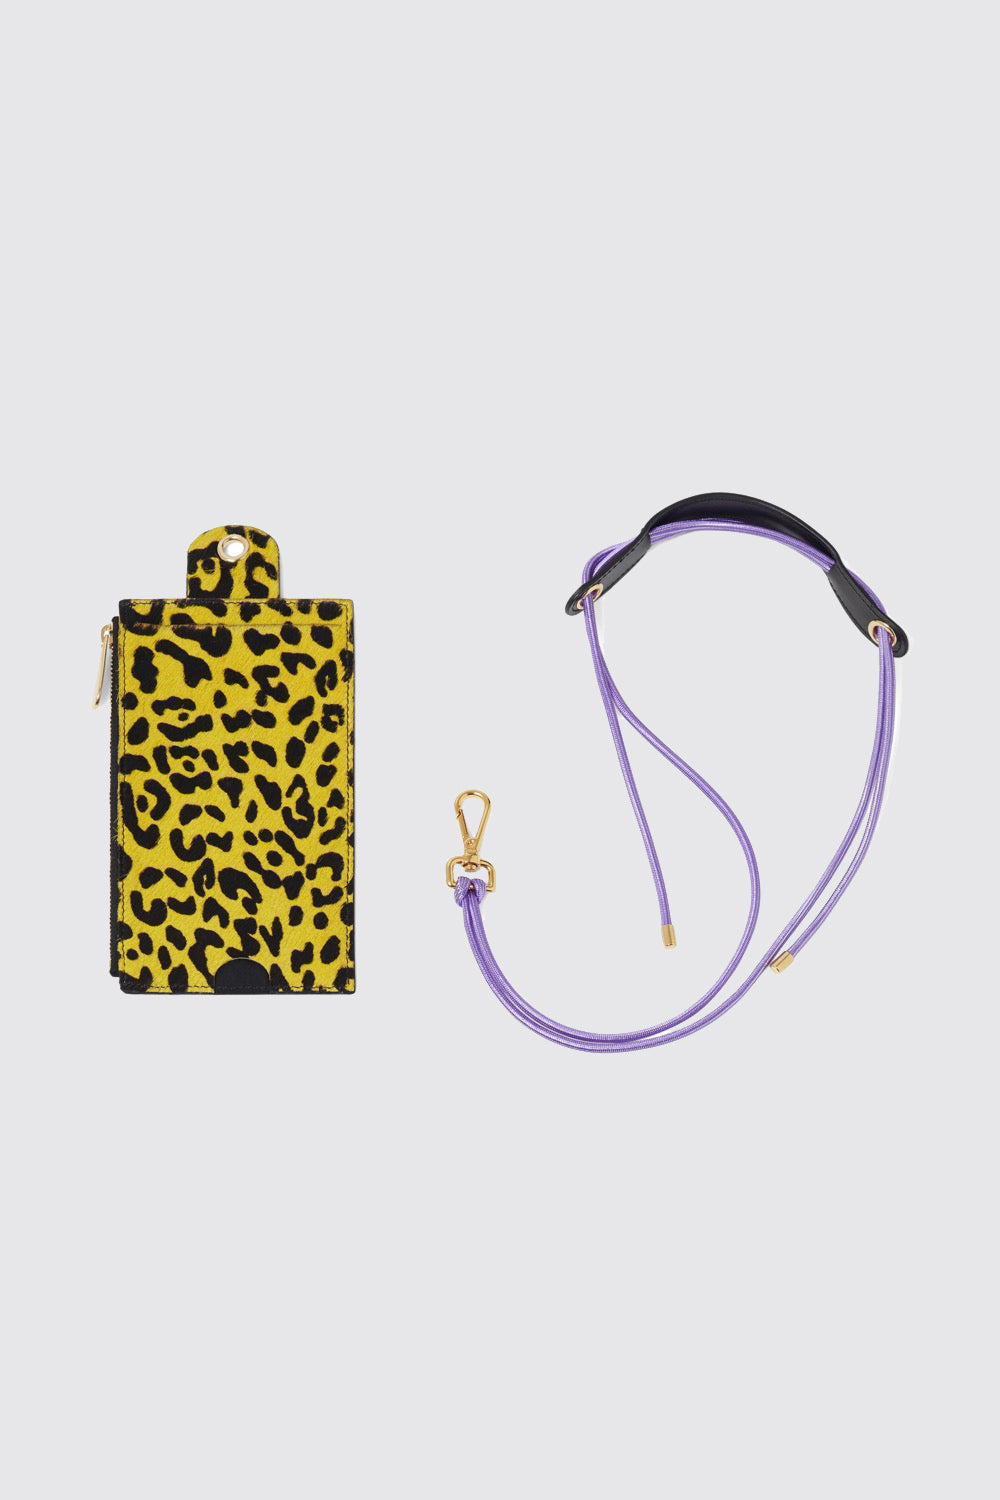 The Minis - Large neck wallet in yellow Leopard printed leather